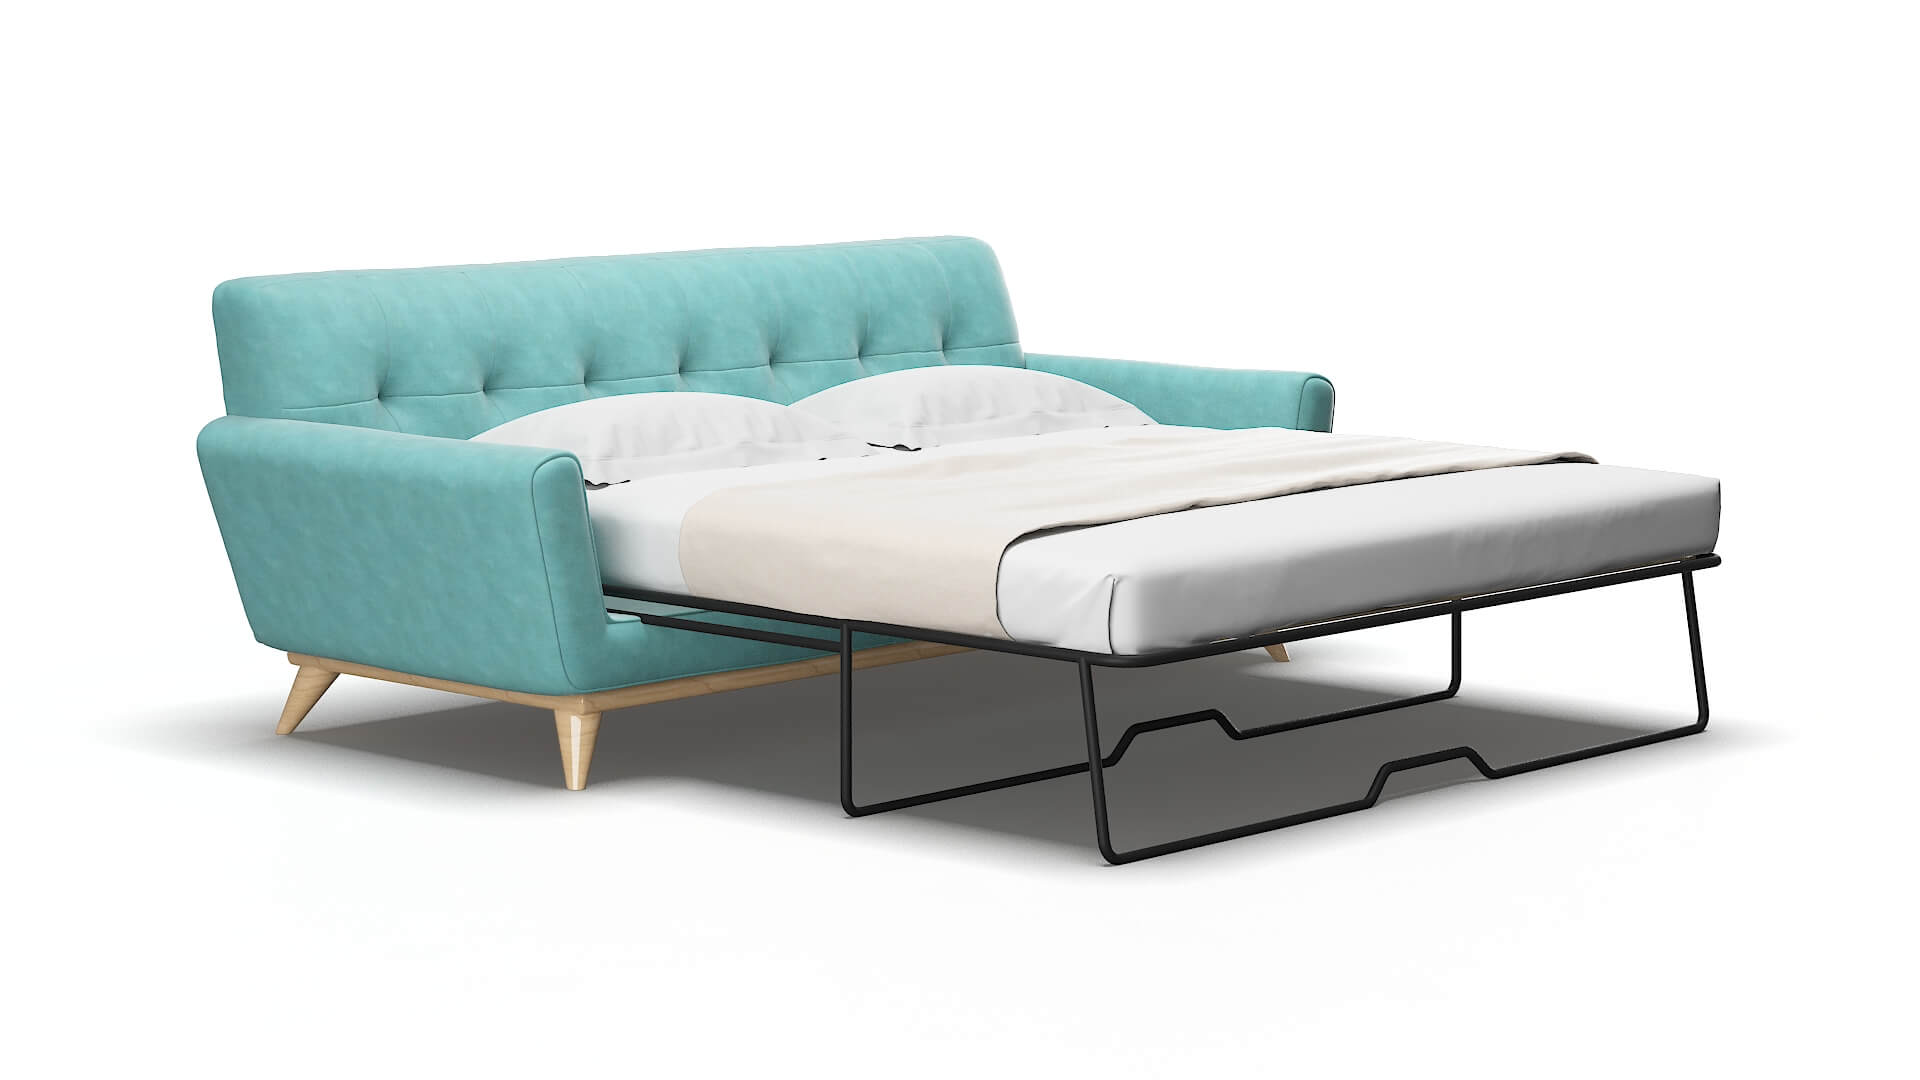 Brussels Curious Turquoise Sofa Sleeper 2